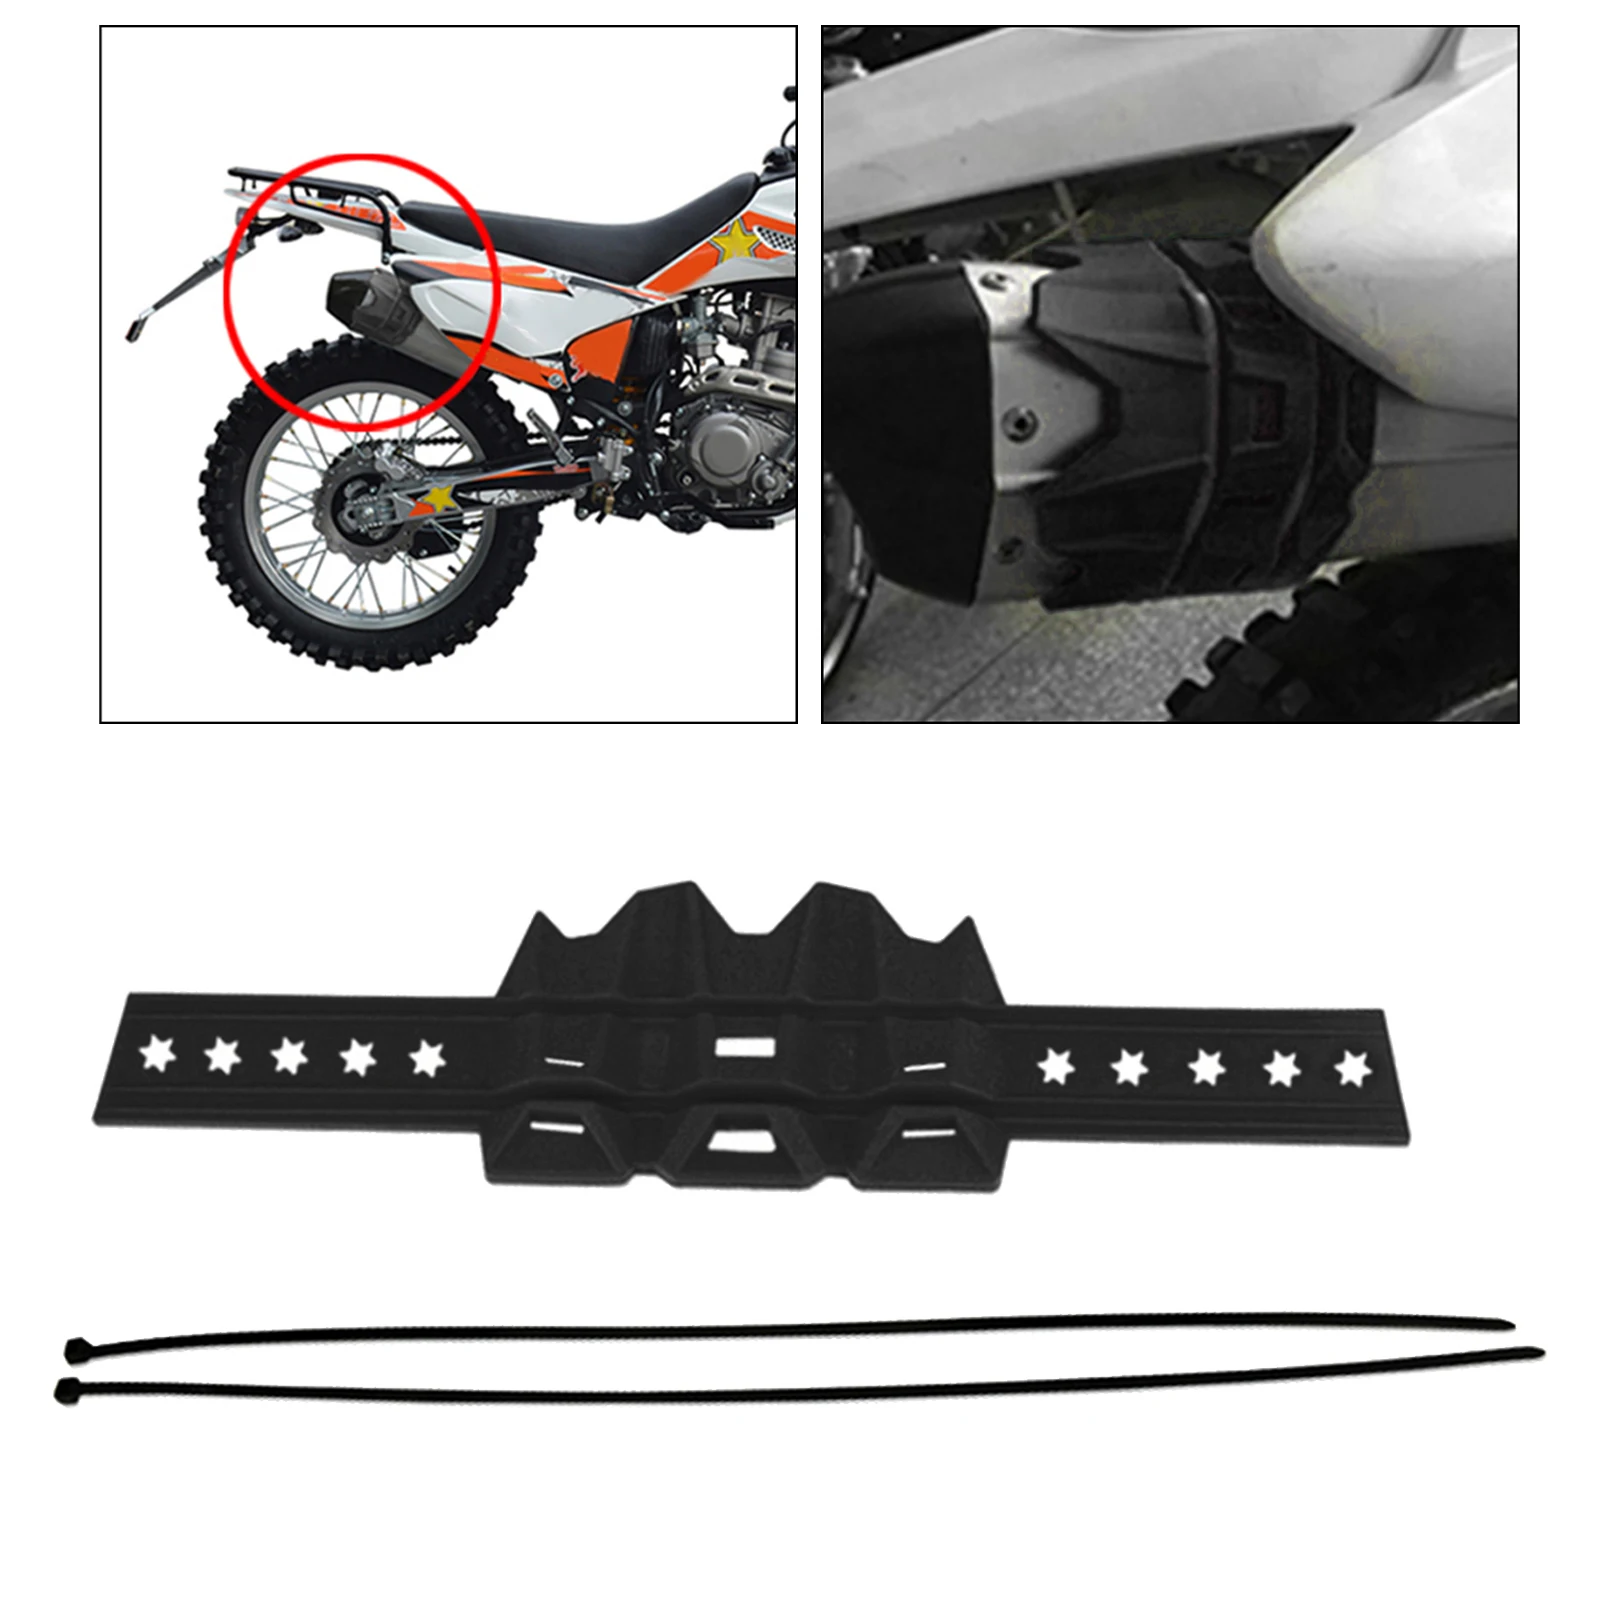 Black Exhaust Muffler Tailpipe Cover Guard Protector Universal for 2 Stroke 4 Stroke Motorcycle